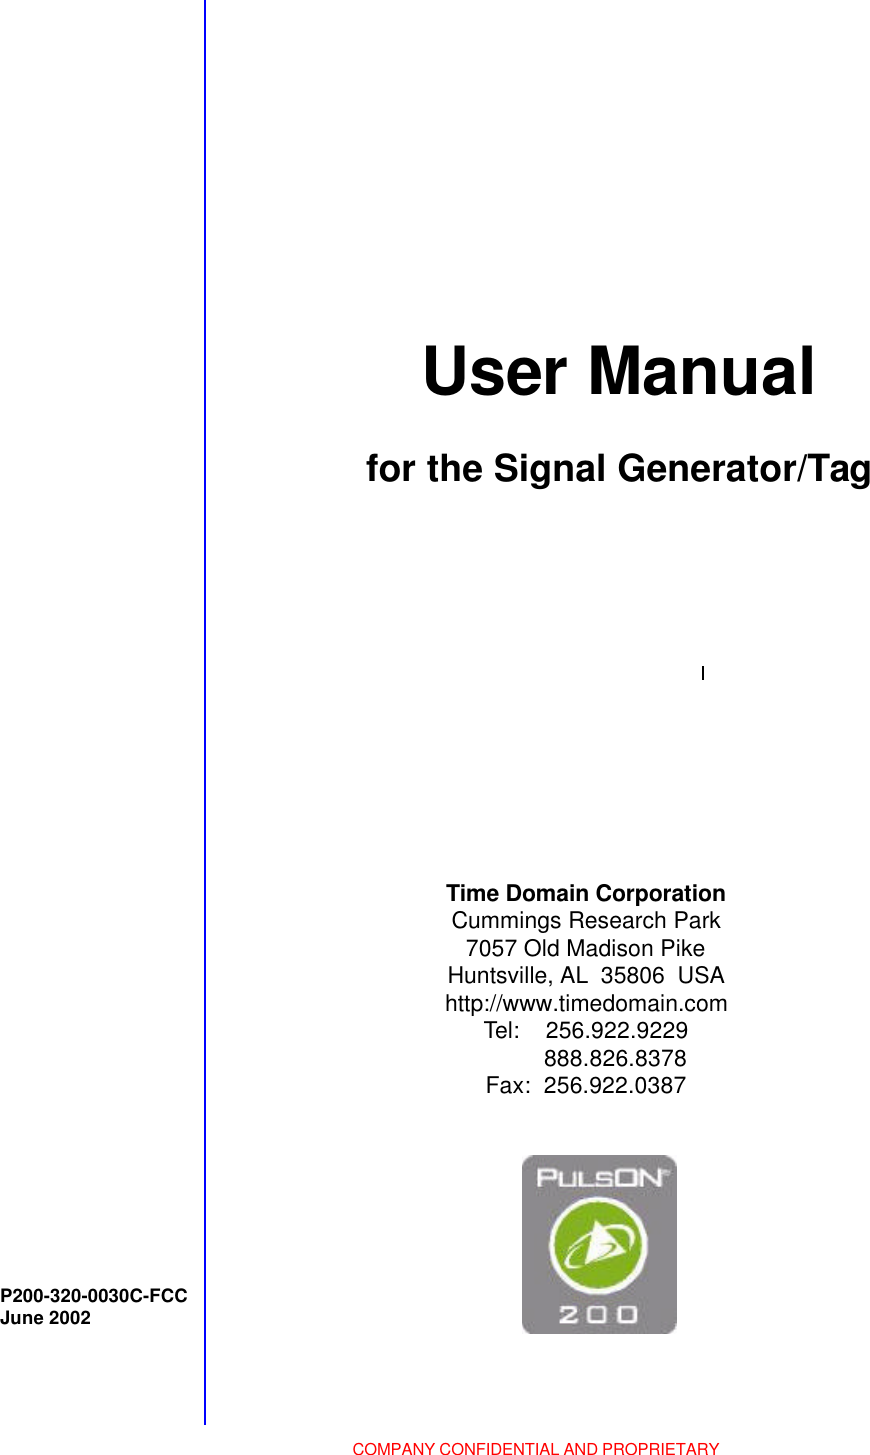 COMPANY CONFIDENTIAL AND PROPRIETARYUser Manualfor the Signal Generator/TagTime Domain CorporationCummings Research Park7057 Old Madison PikeHuntsville, AL  35806  USAhttp://www.timedomain.comTel:    256.922.9229         888.826.8378Fax:  256.922.0387P200-320-0030C-FCCJune 2002